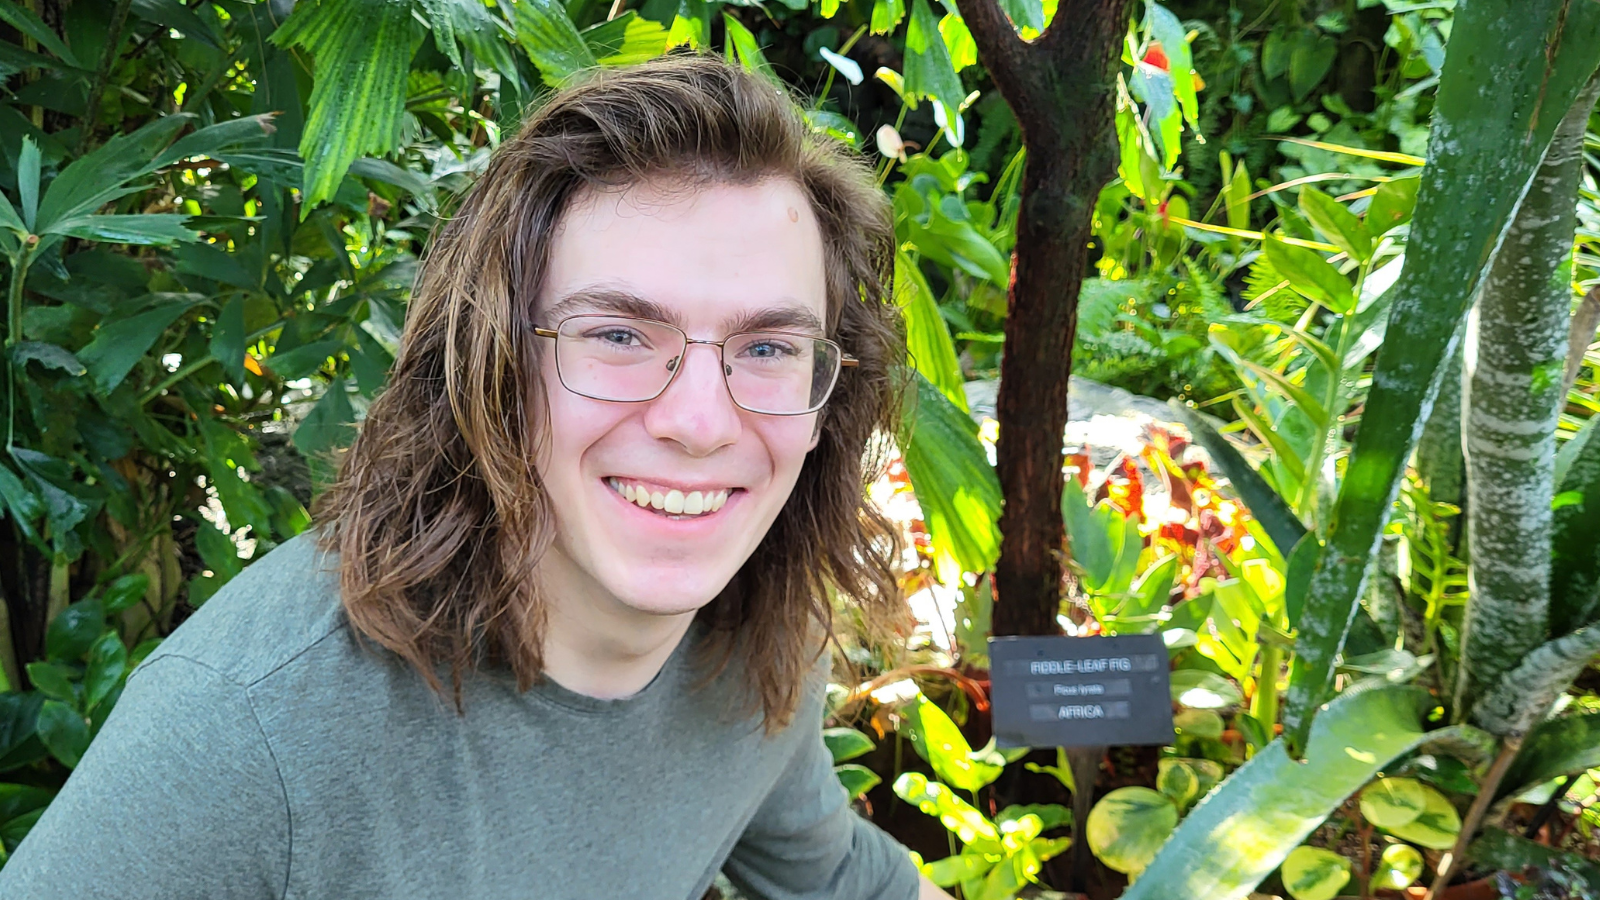 Portrait of Noah in front of some plants in a garden.